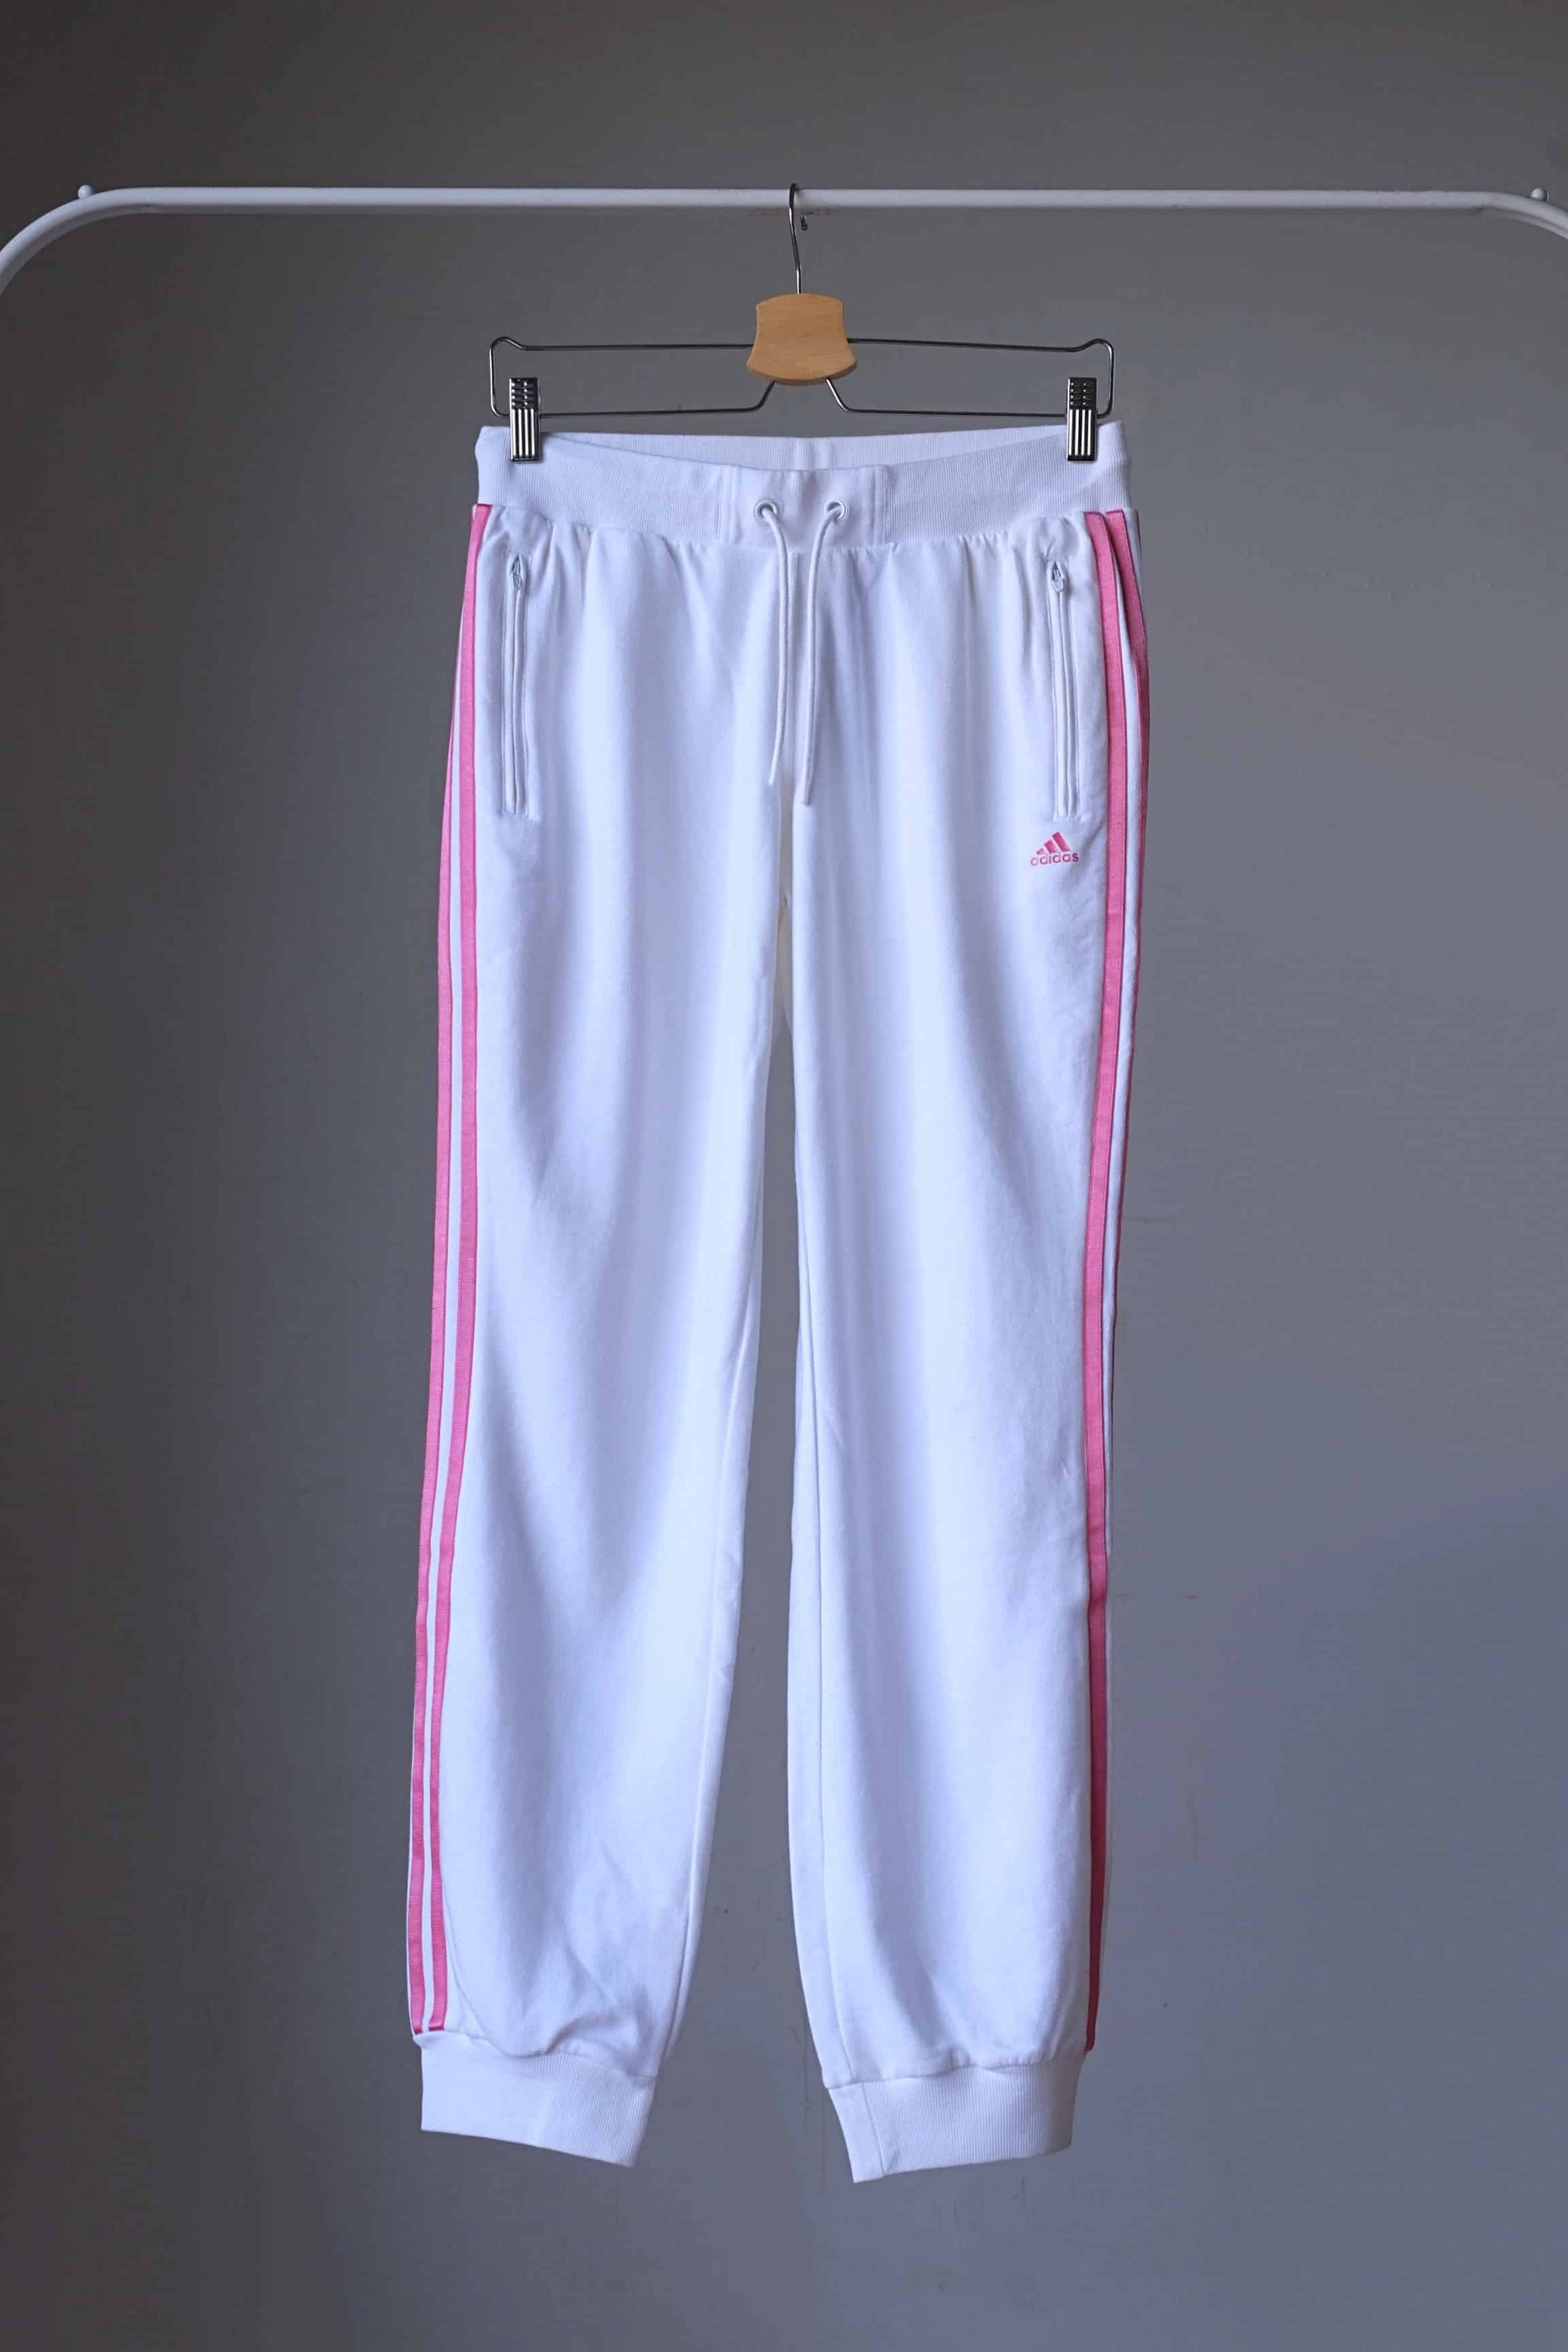 Vintage Adidas Sweatpants white and pink 3 stripes